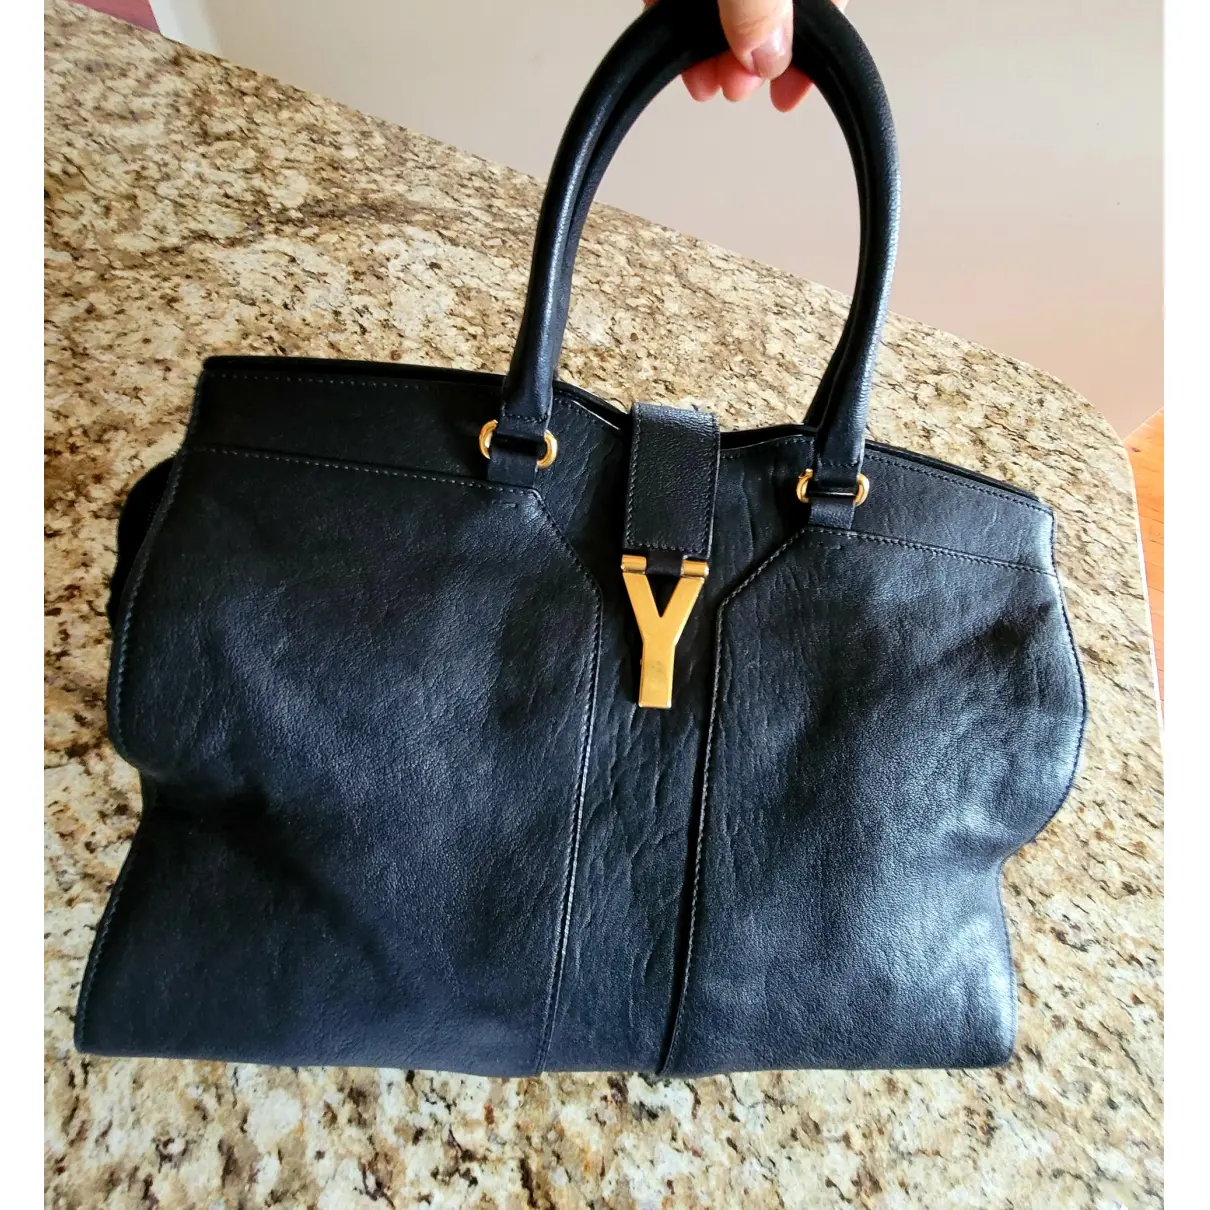 Buy Yves Saint Laurent Chyc leather tote online